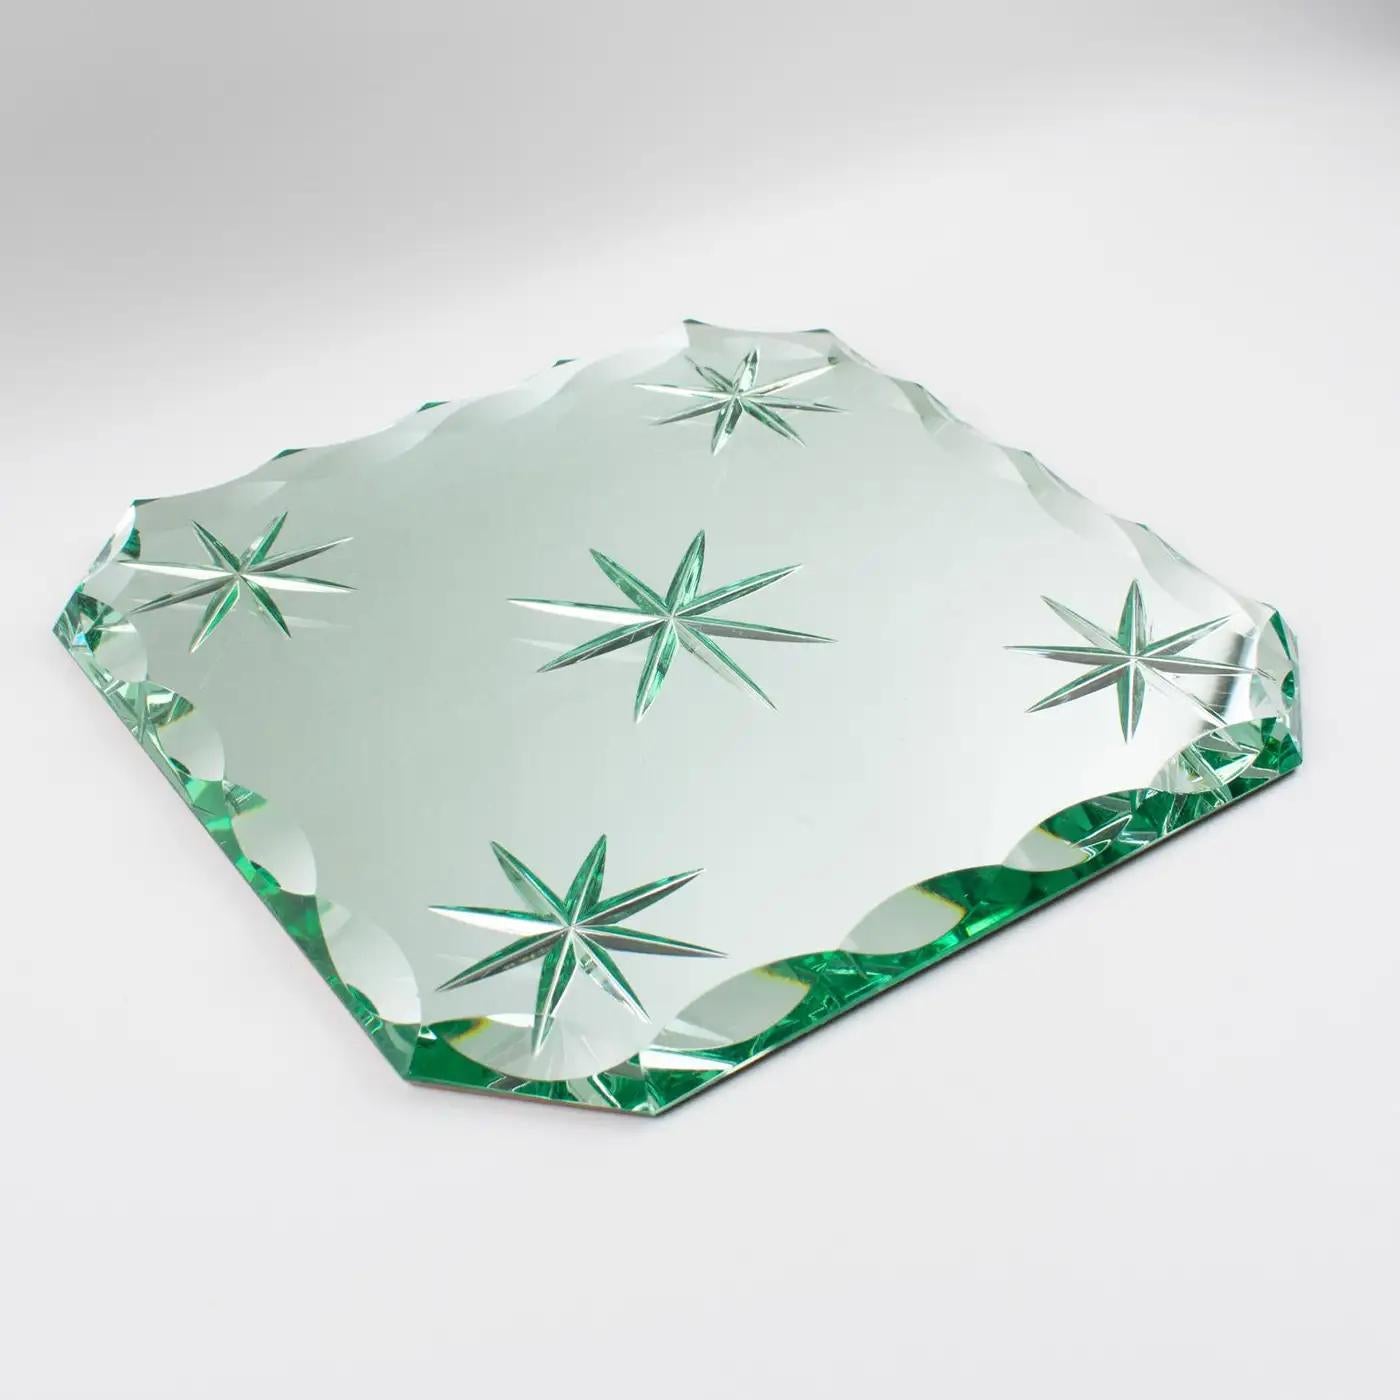 Jean Luce Art Deco Mirrored Glass Tray, Platter or Centerpiece, 1930s For Sale 6